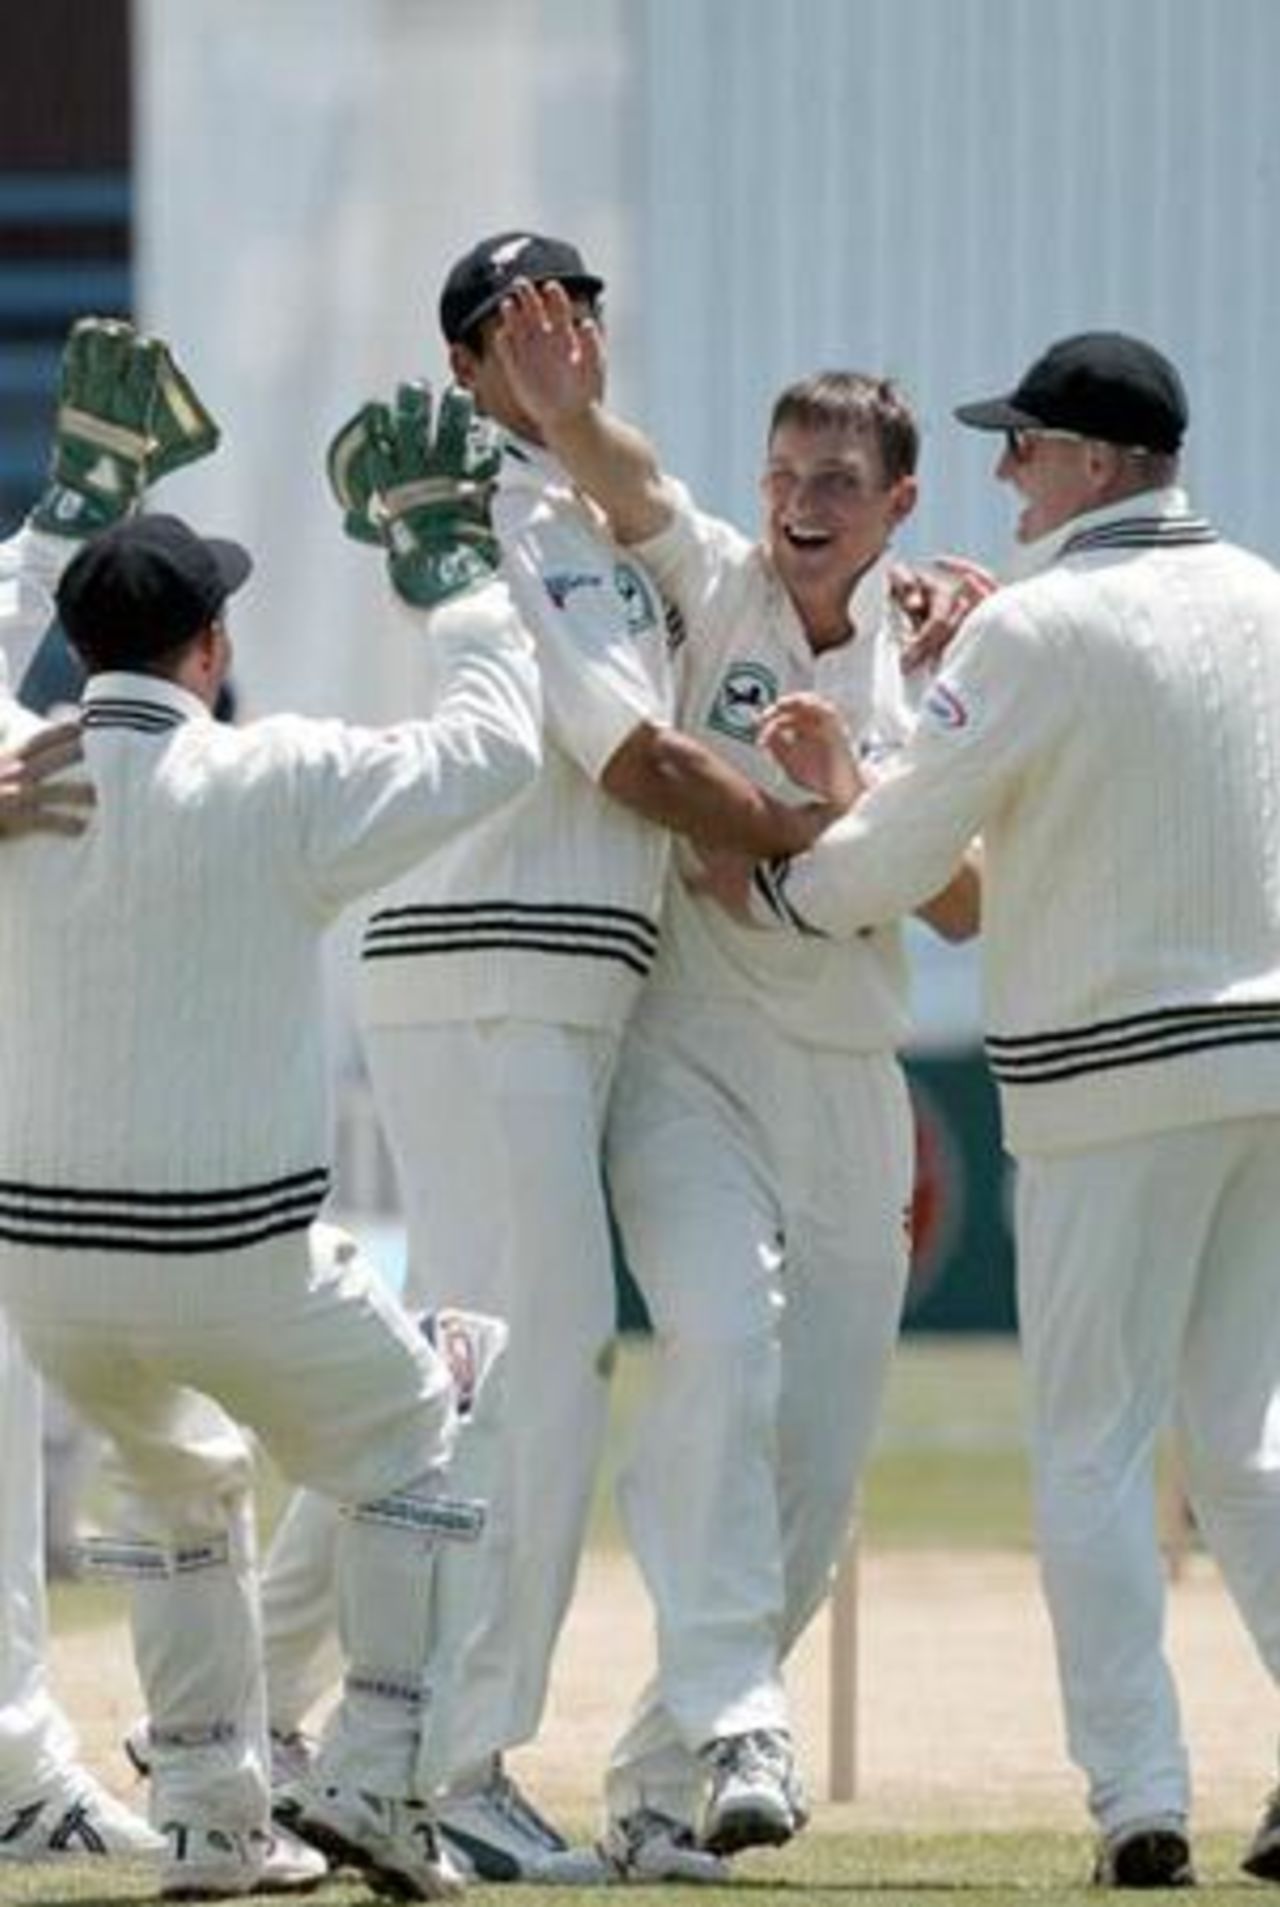 Members of the New Zealand team celebrate the dismissal of Indian batsman Sourav Ganguly, caught by wicket-keeper Robbie Hart off the bowling of Shane Bond for two. From left: Hart, Daryl Tuffey (obscured), Bond and Scott Styris. 1st Test: New Zealand v India at Basin Reserve, Wellington, 12-16 December 2002 (14 December 2002).